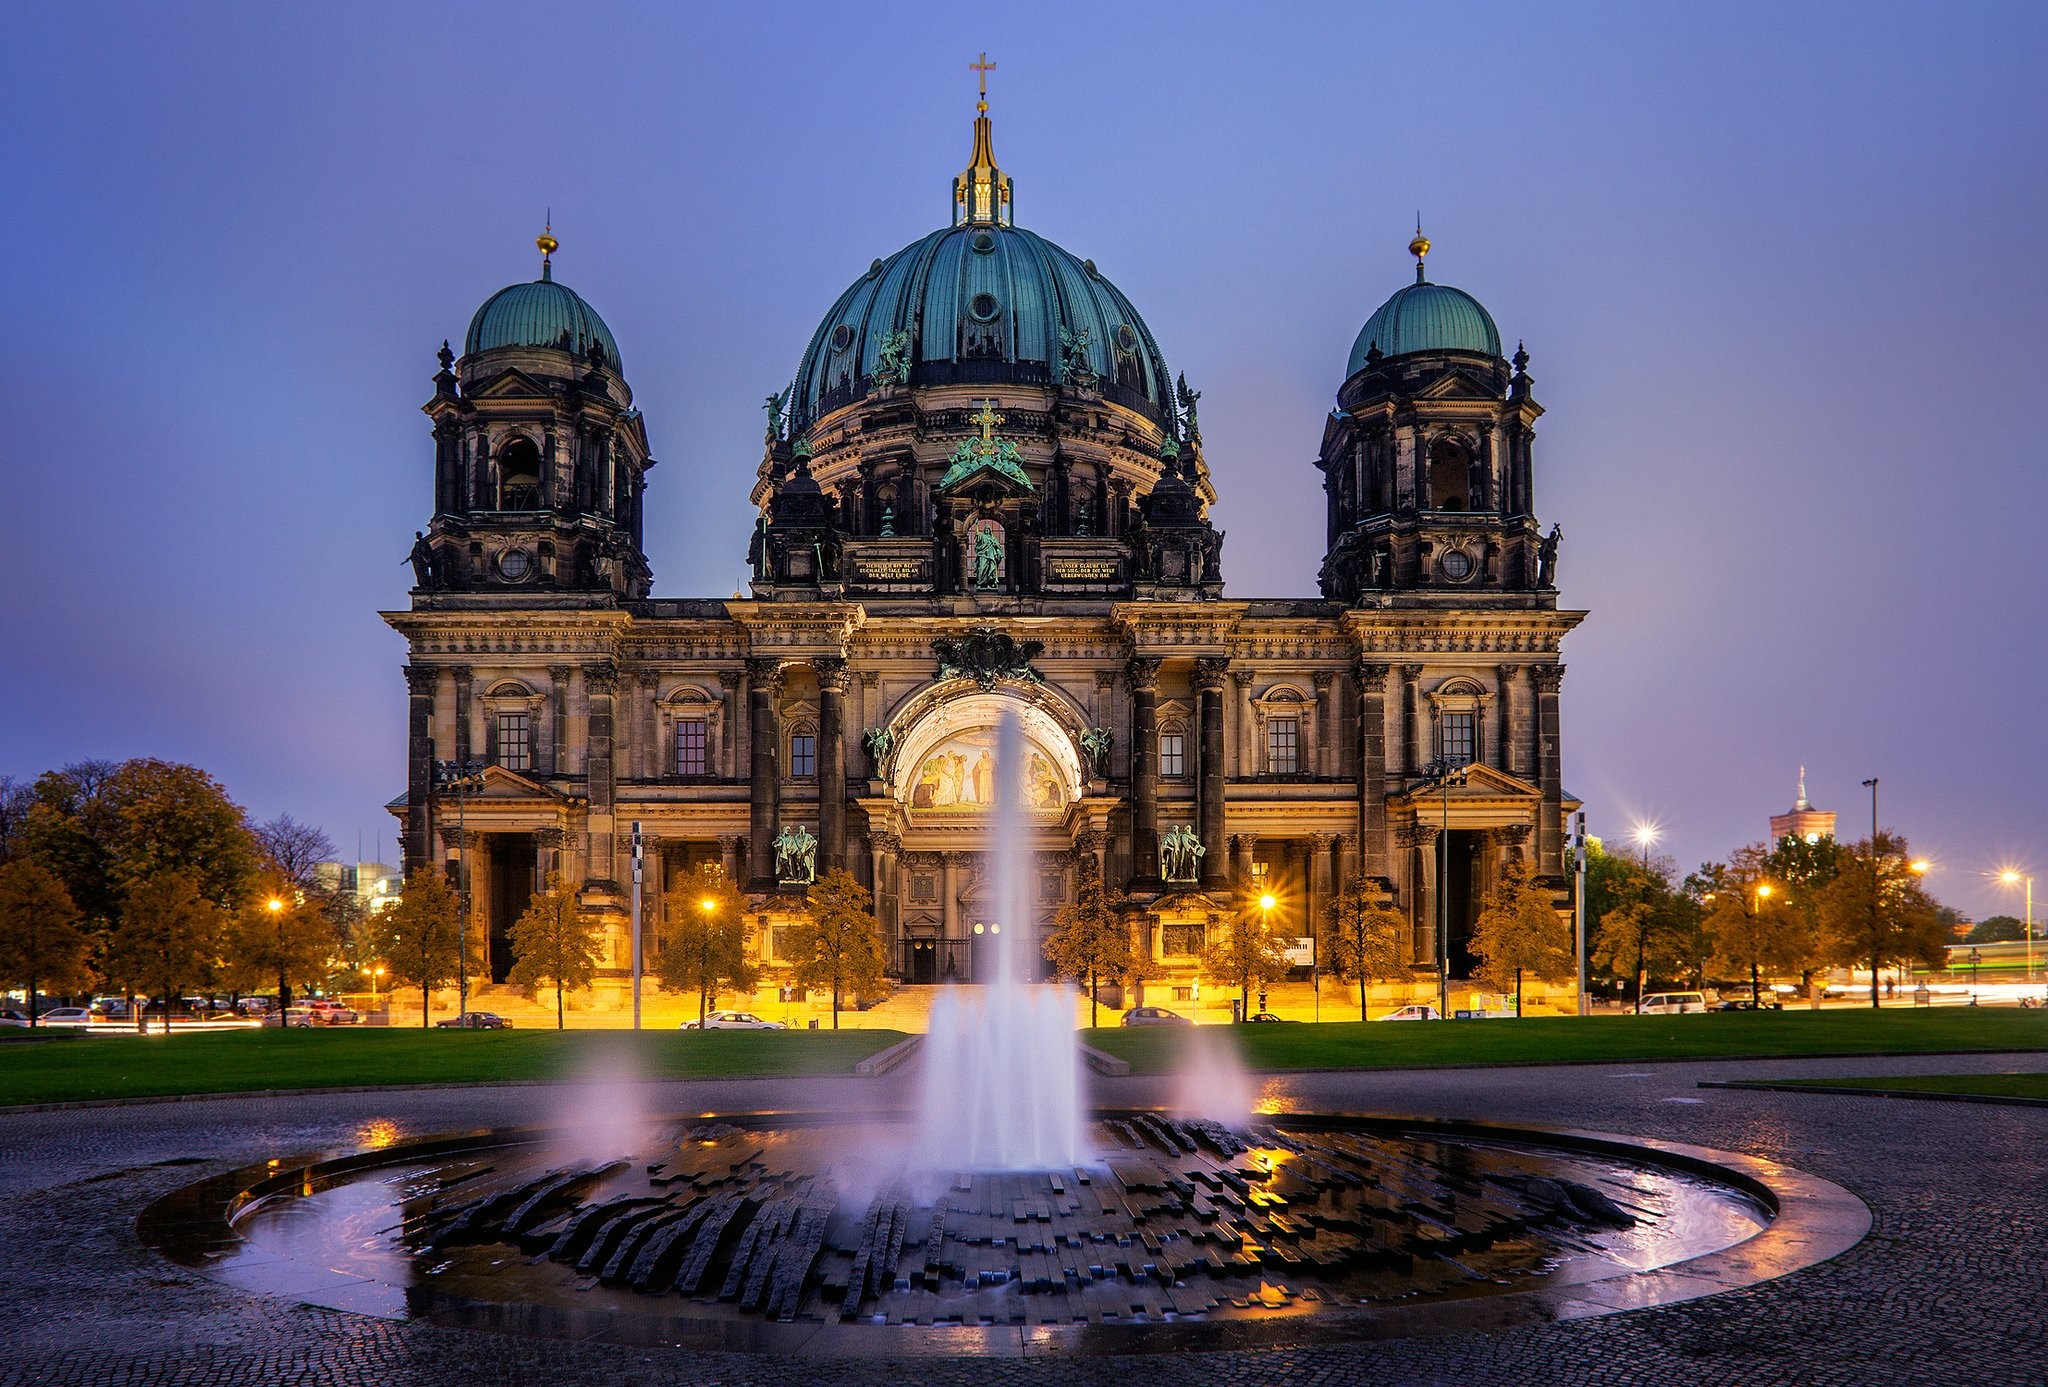 General 2048x1387 building Berlin Germany fountain evening calm